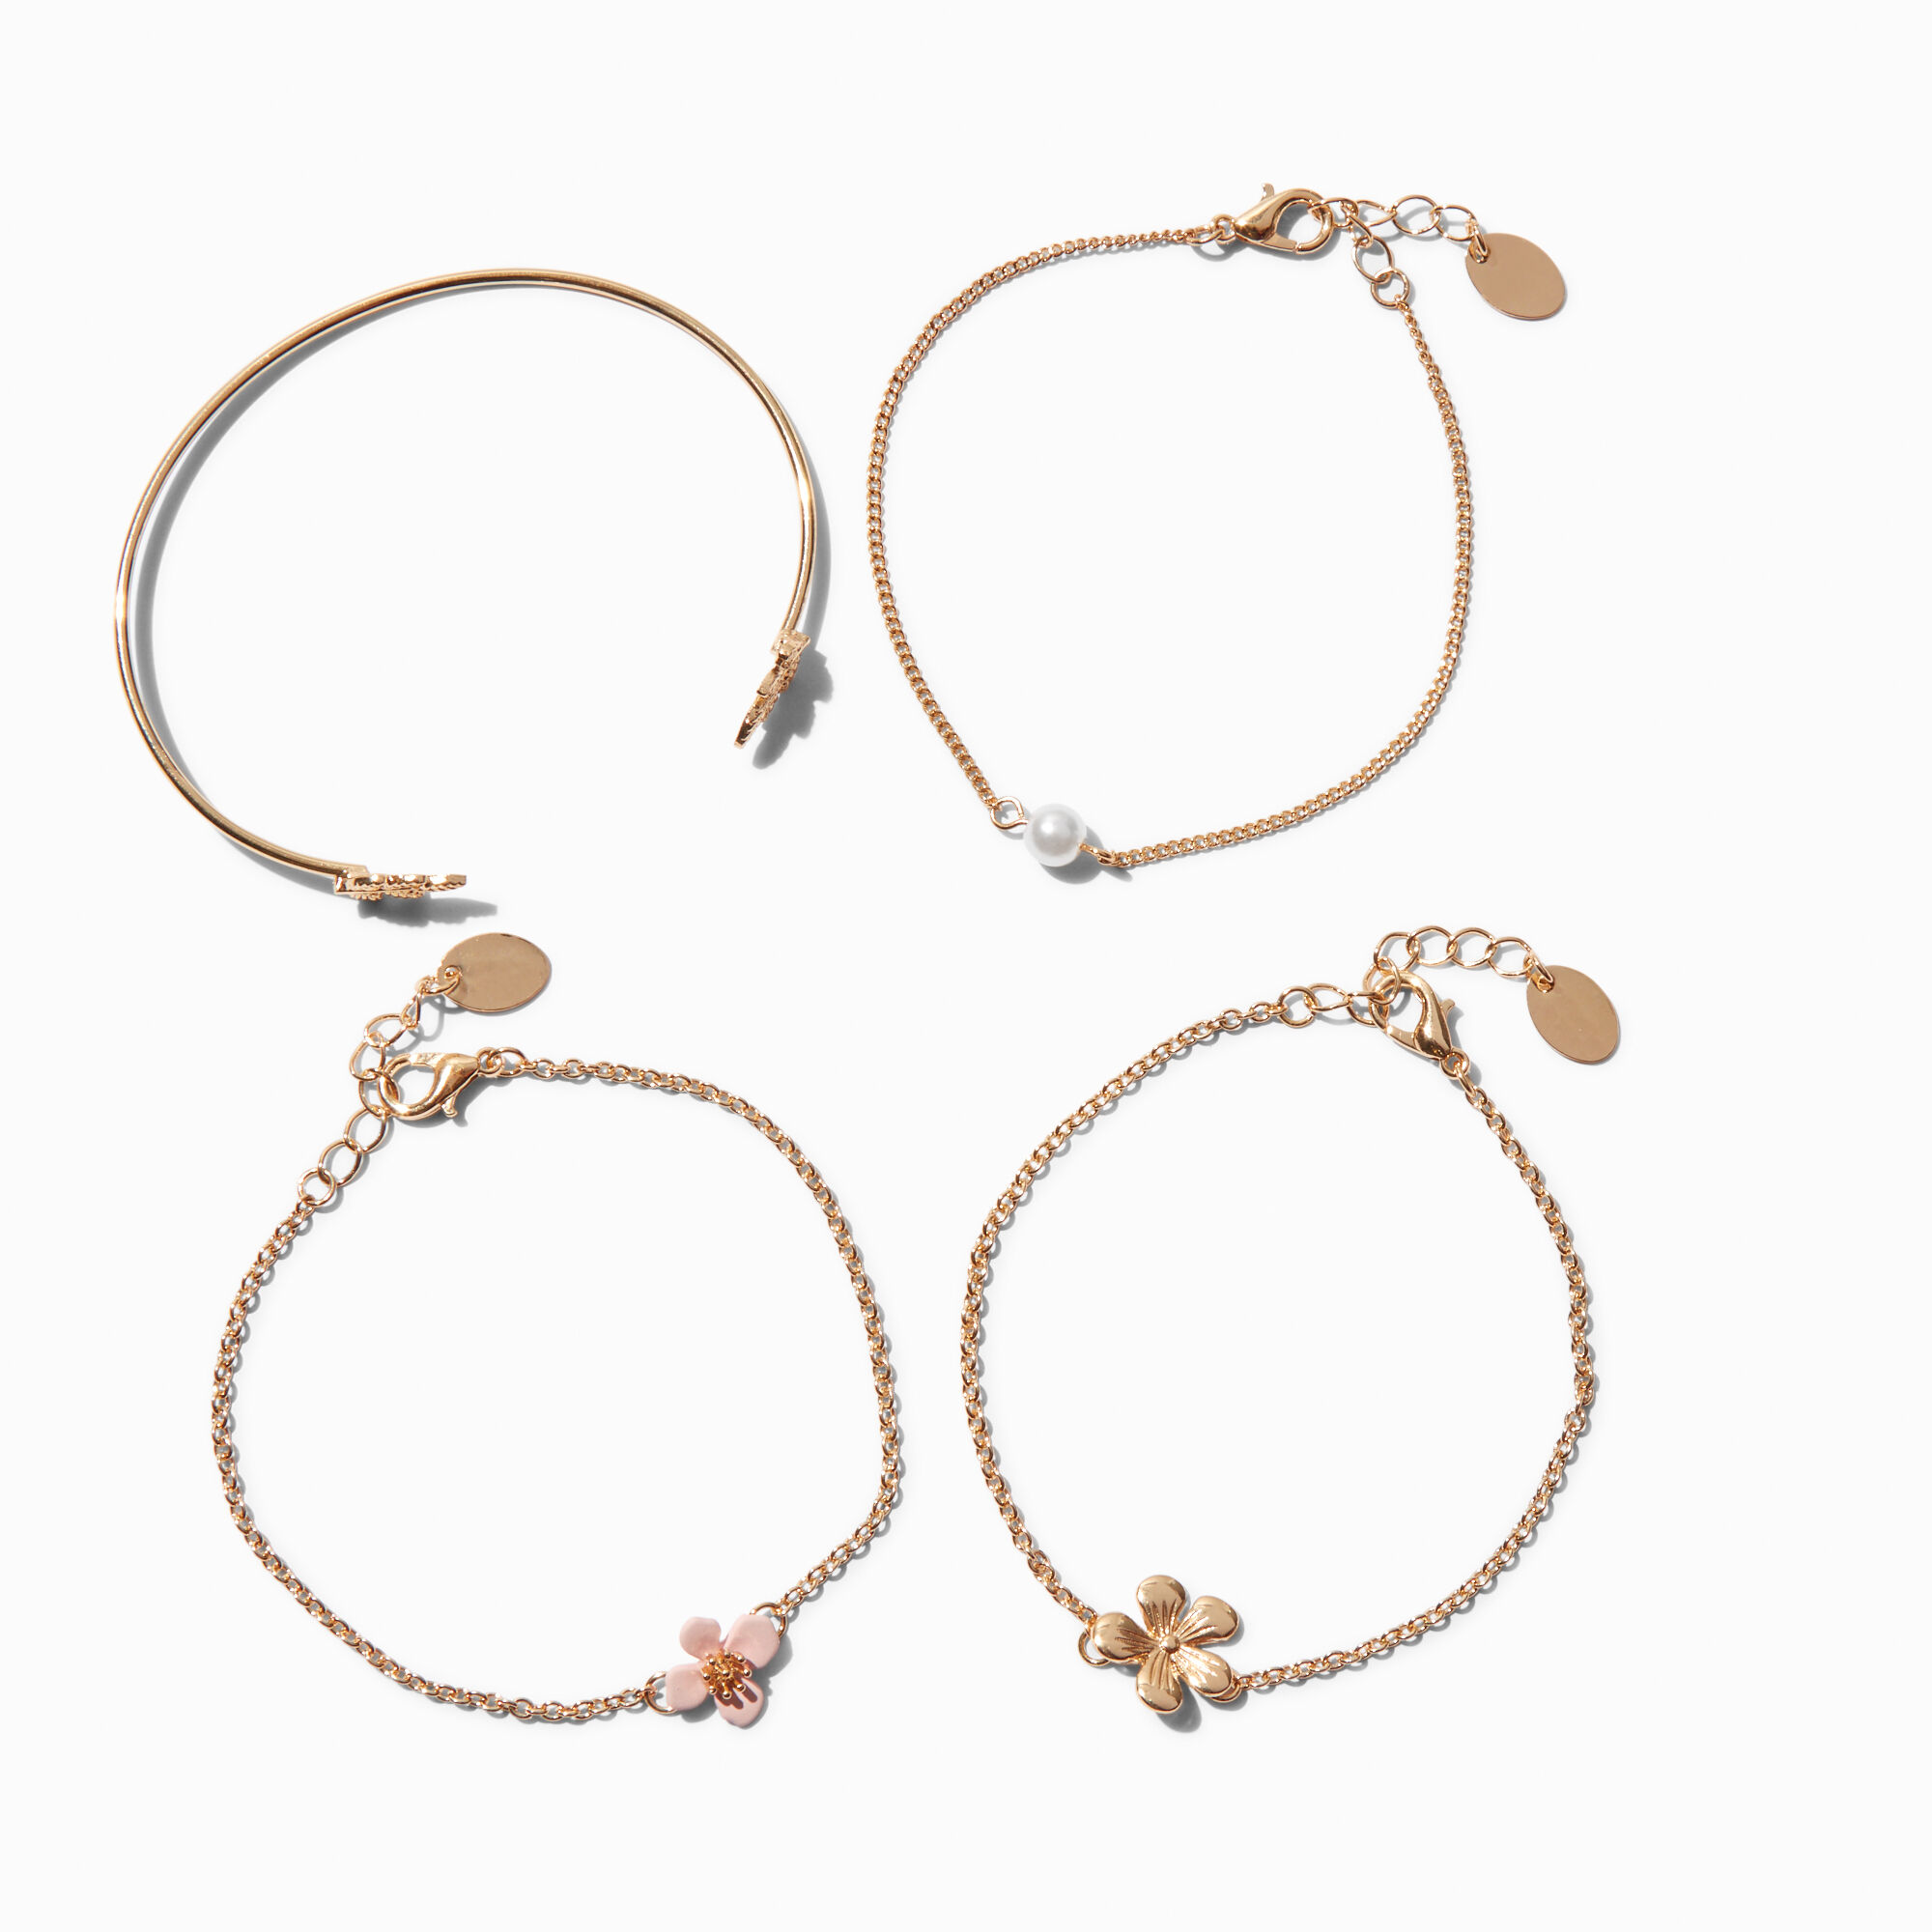 View Claires Cherry Blossom Chain Cuff Bracelet Set 4 Pack Gold information